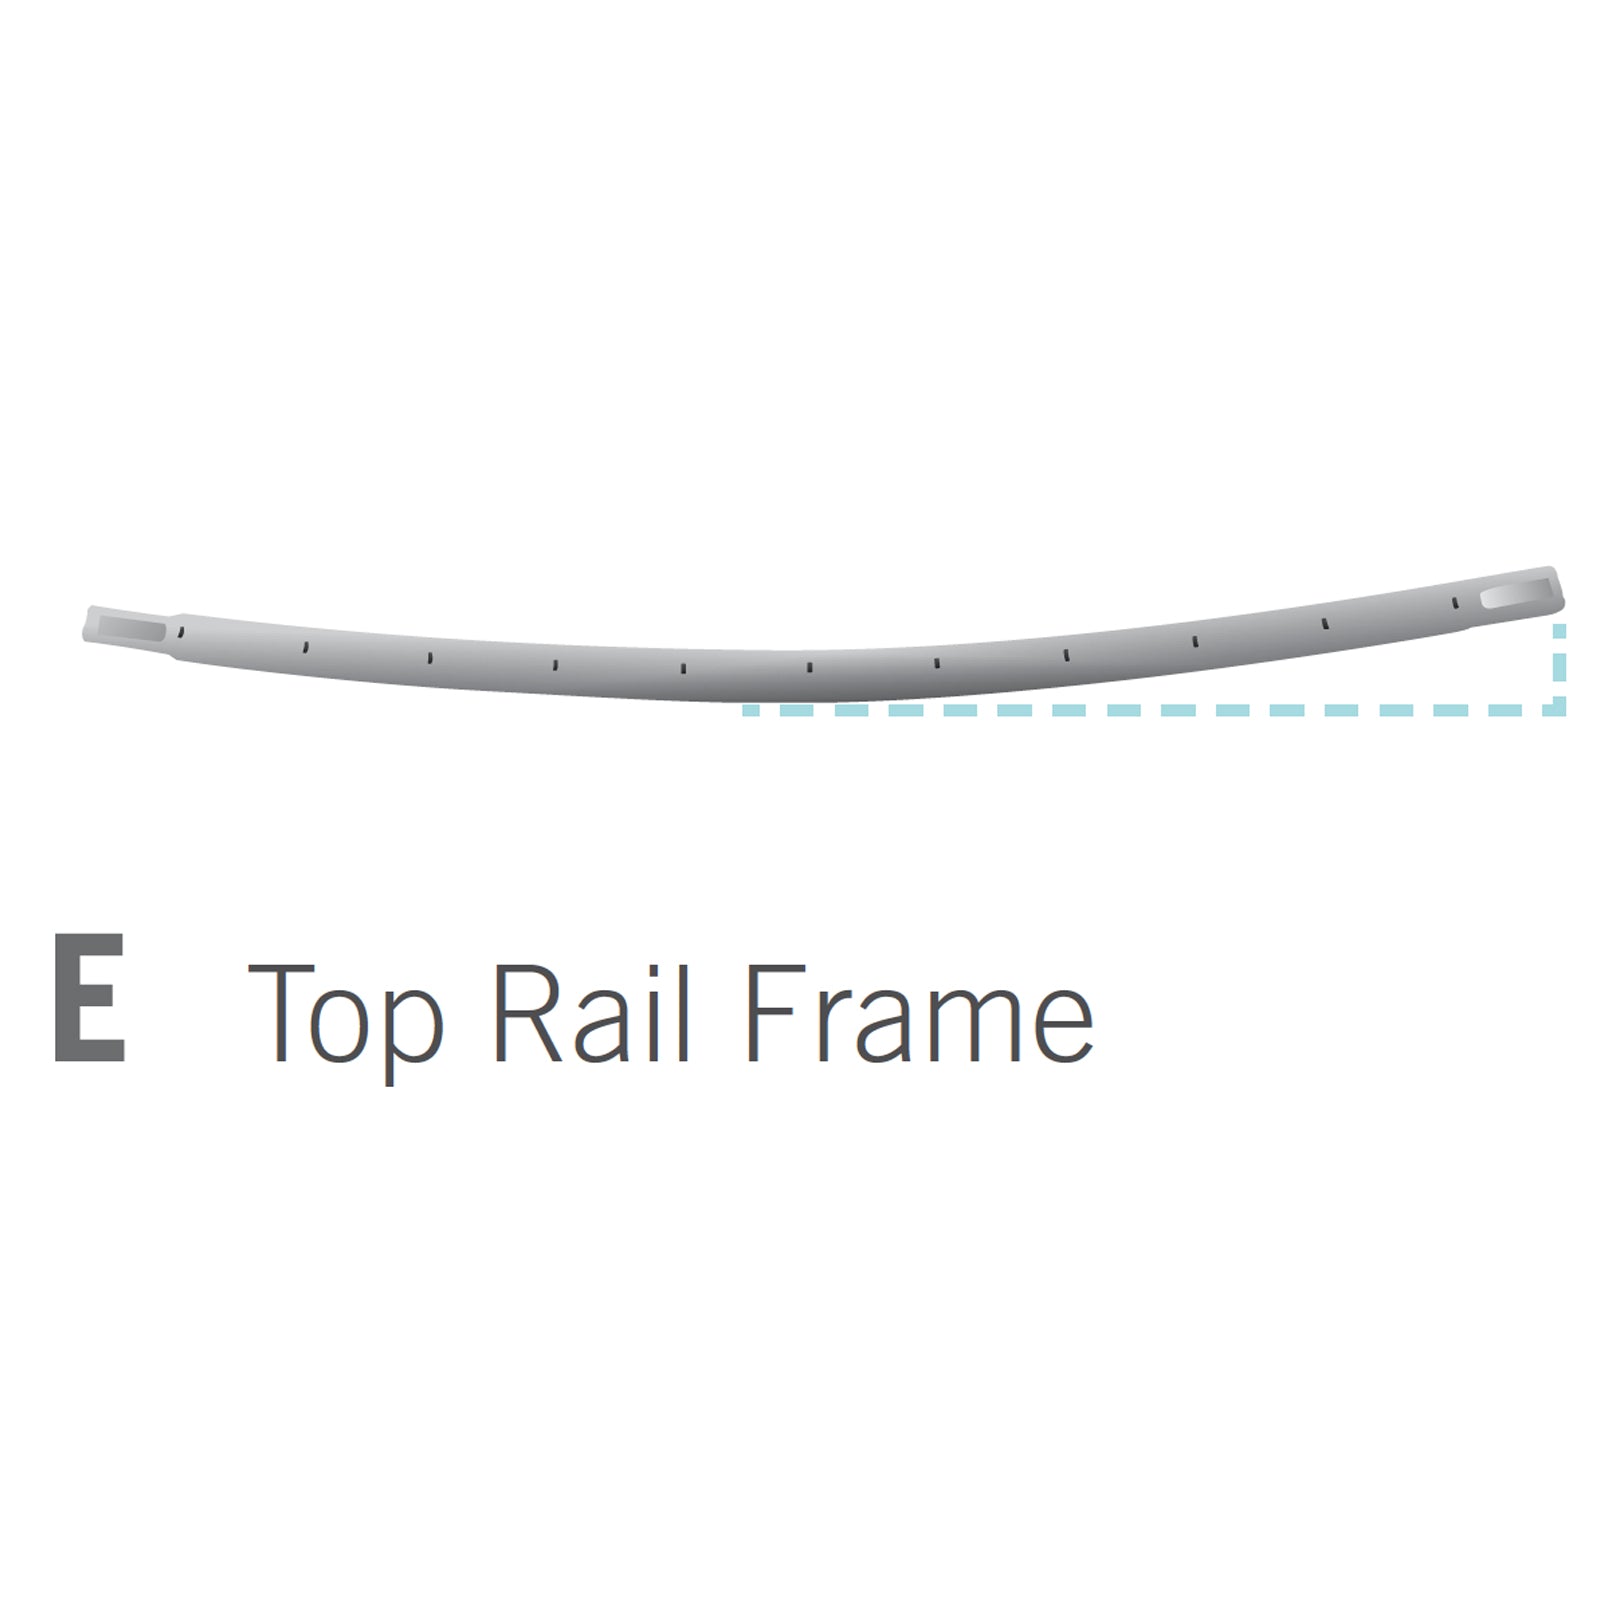 Top Rail for 10x14 foot Orion Trampoline (Part E).